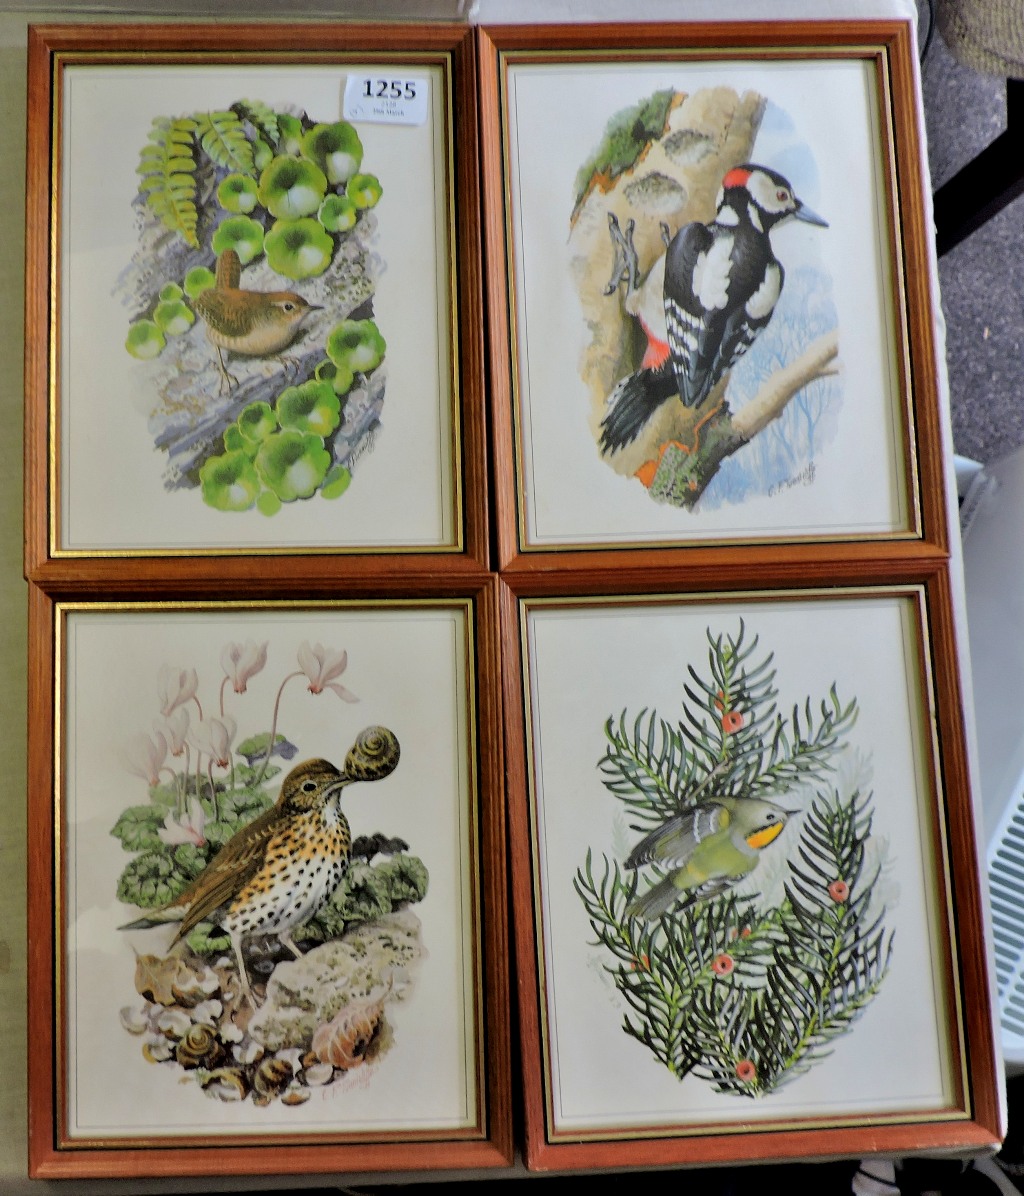 Framed Pictures(4) of wildbirds in very good condition, no foxing prints by C.F.Tunncliffe